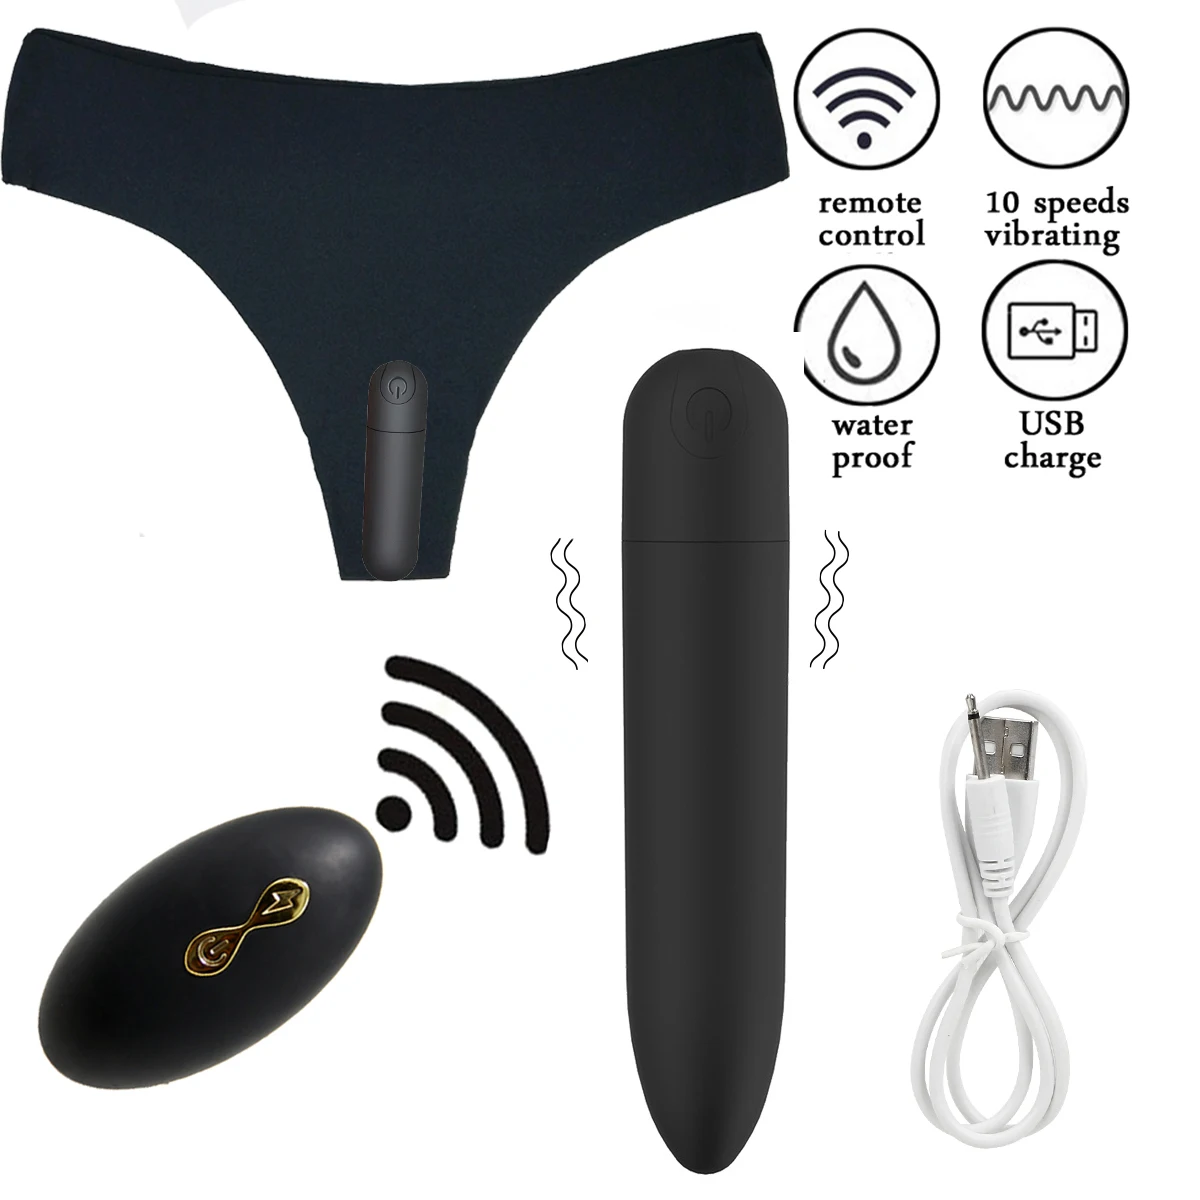 Wholesale Vibrating Panties 10 Function Wireless Remote Control Bullet Vibrator Strap on Underwear Vibrator for Women Sex Toy From m.alibaba photo